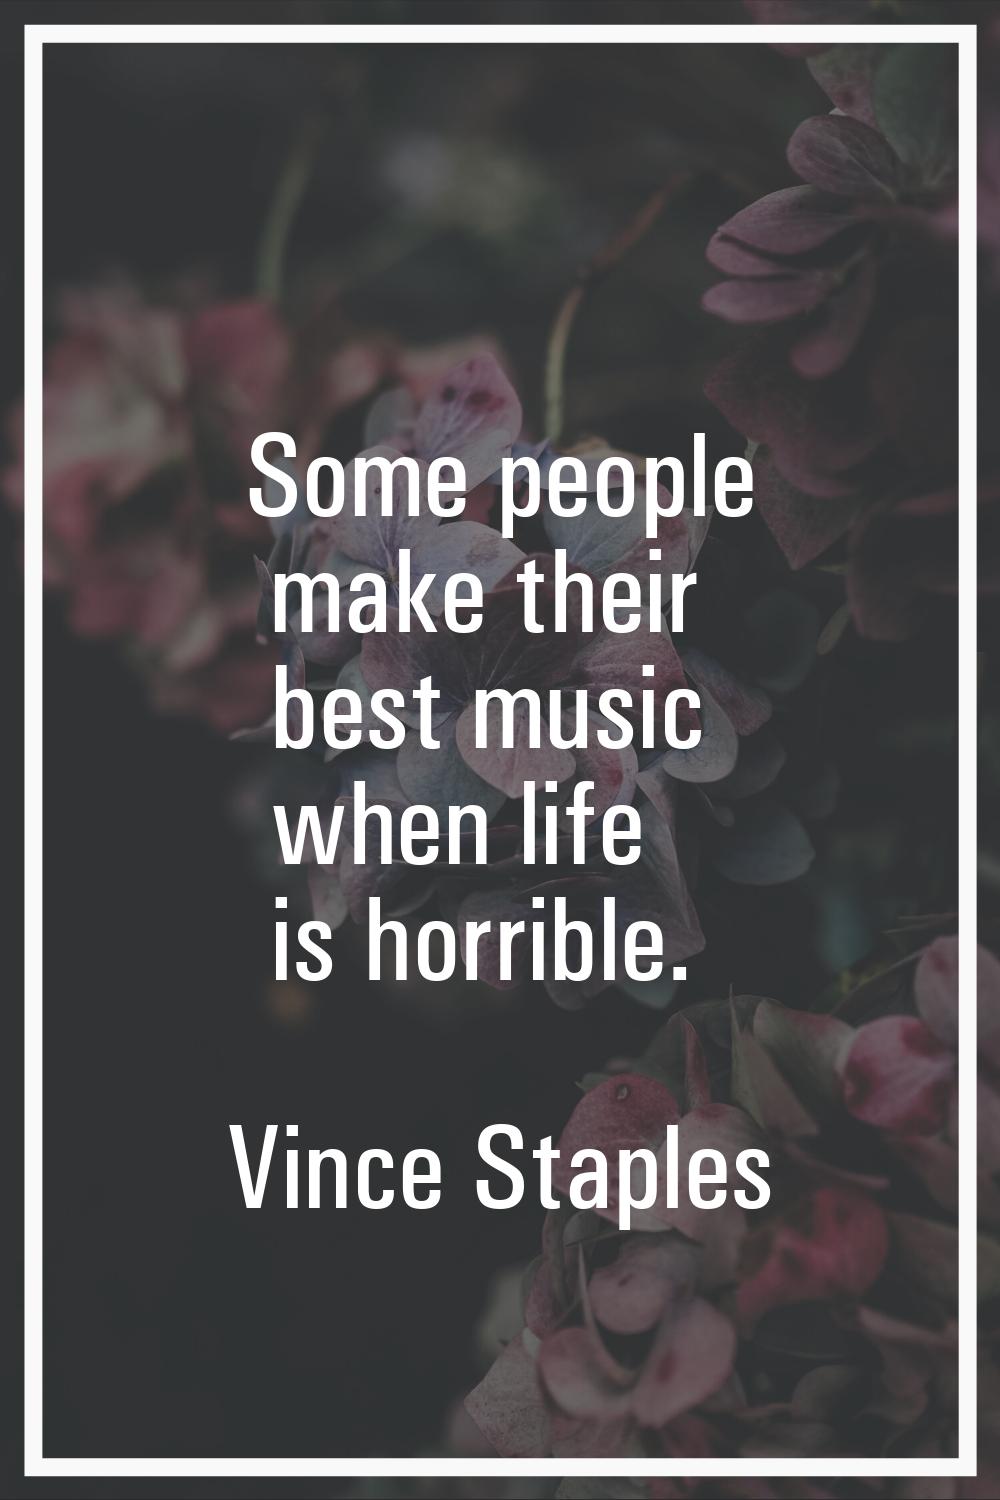 Some people make their best music when life is horrible.